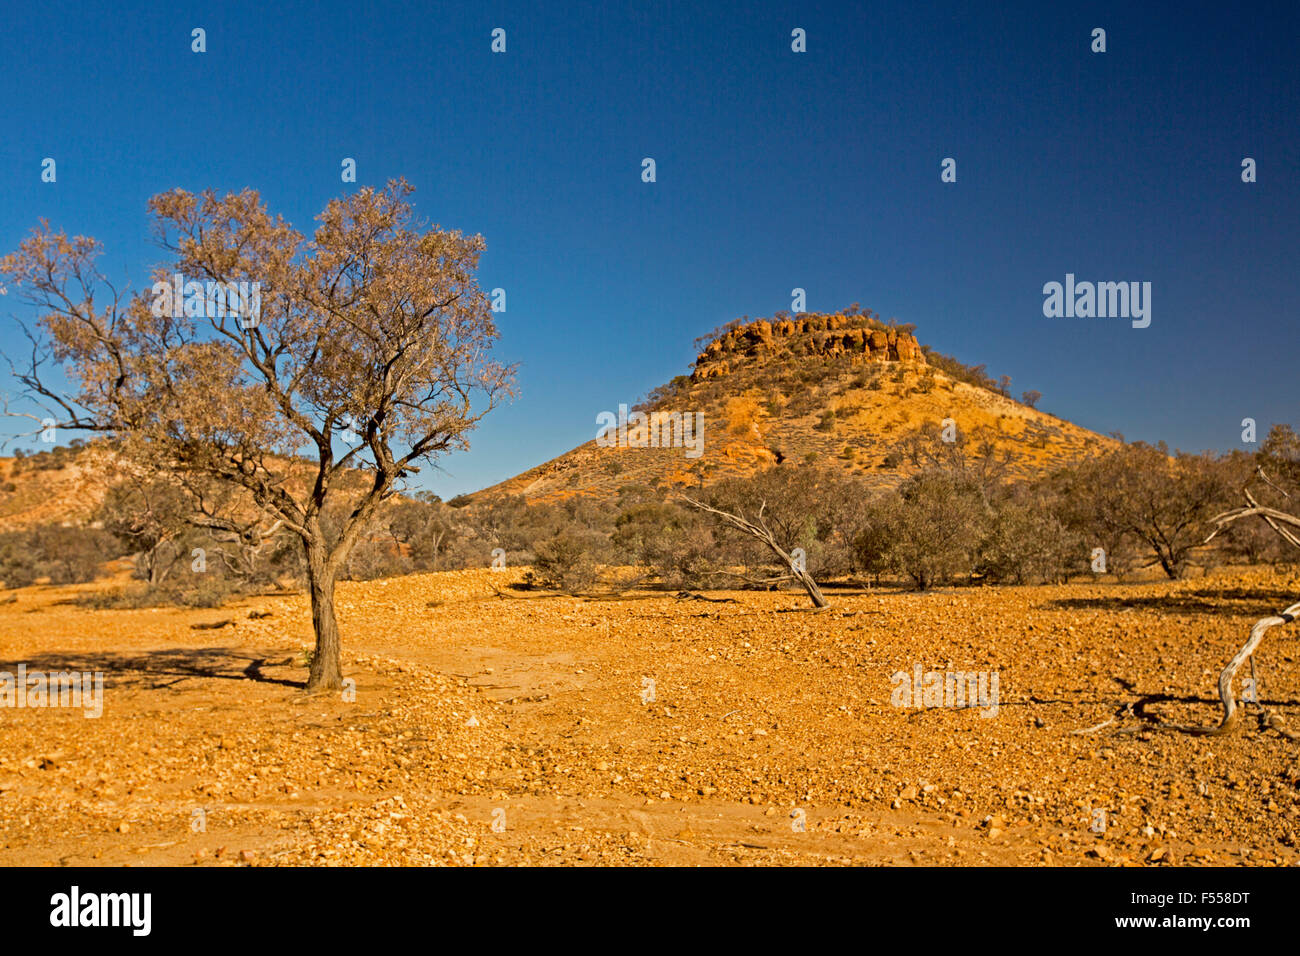 Australian outback landscape, conical flat-topped stony hill / mesa, hemmed by low trees, rising from barren red stony ground into blue sky Stock Photo